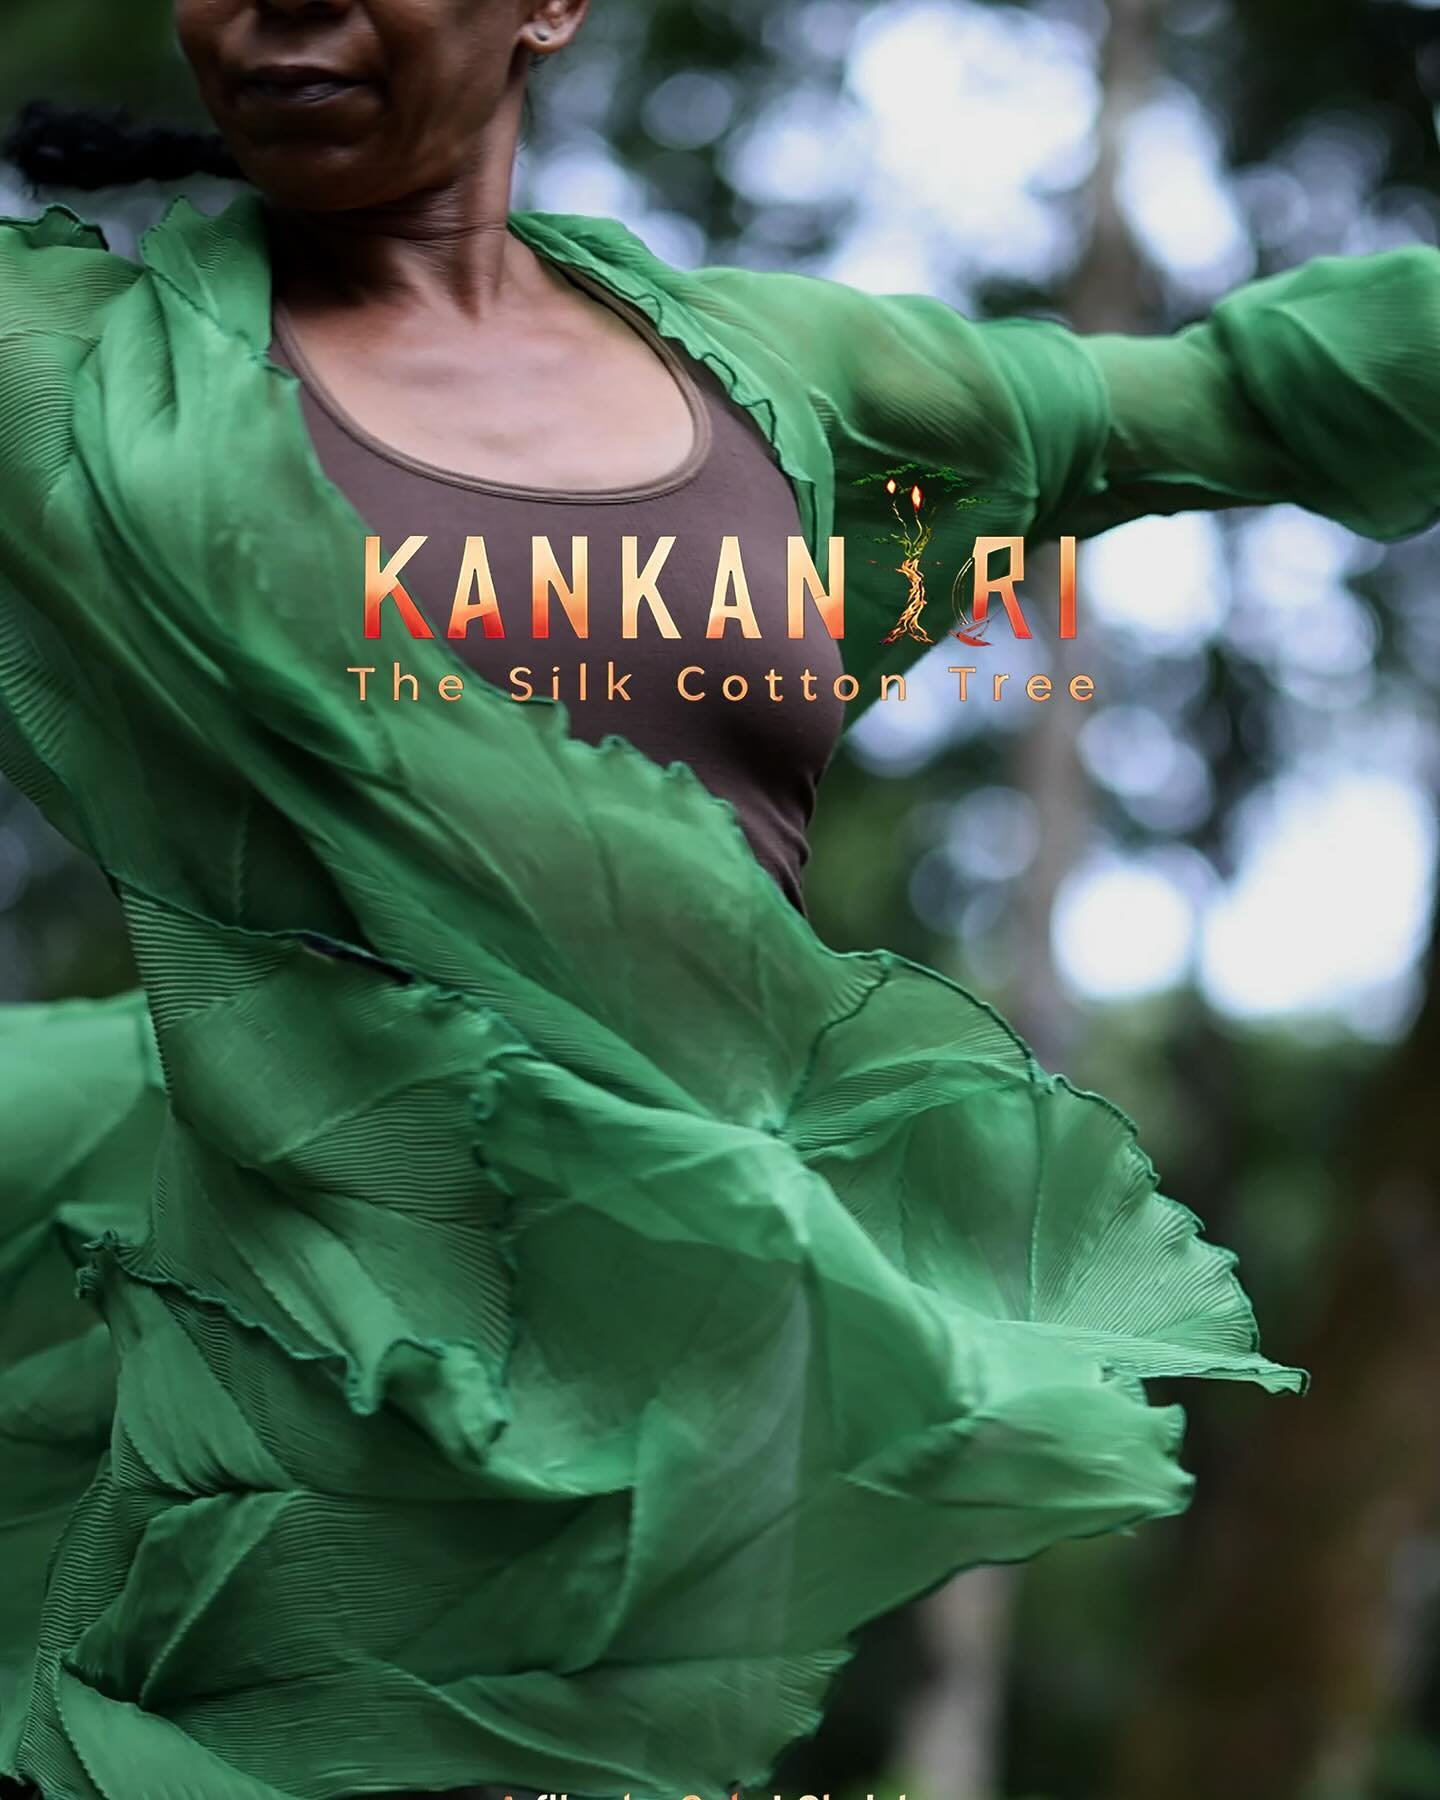 This is poster #3. Credits didn&rsquo;t fit for IG. #4 is the one we chose!!! Coming soon.  Hope to see you @harlemfilmfest May 16, 3.30 pm Tickets are FREE, link in Bio!  Or here: http://bit.ly/4a7ZFSO

KANKANTRI The Silk Cotton Tree
by Gabri Christ